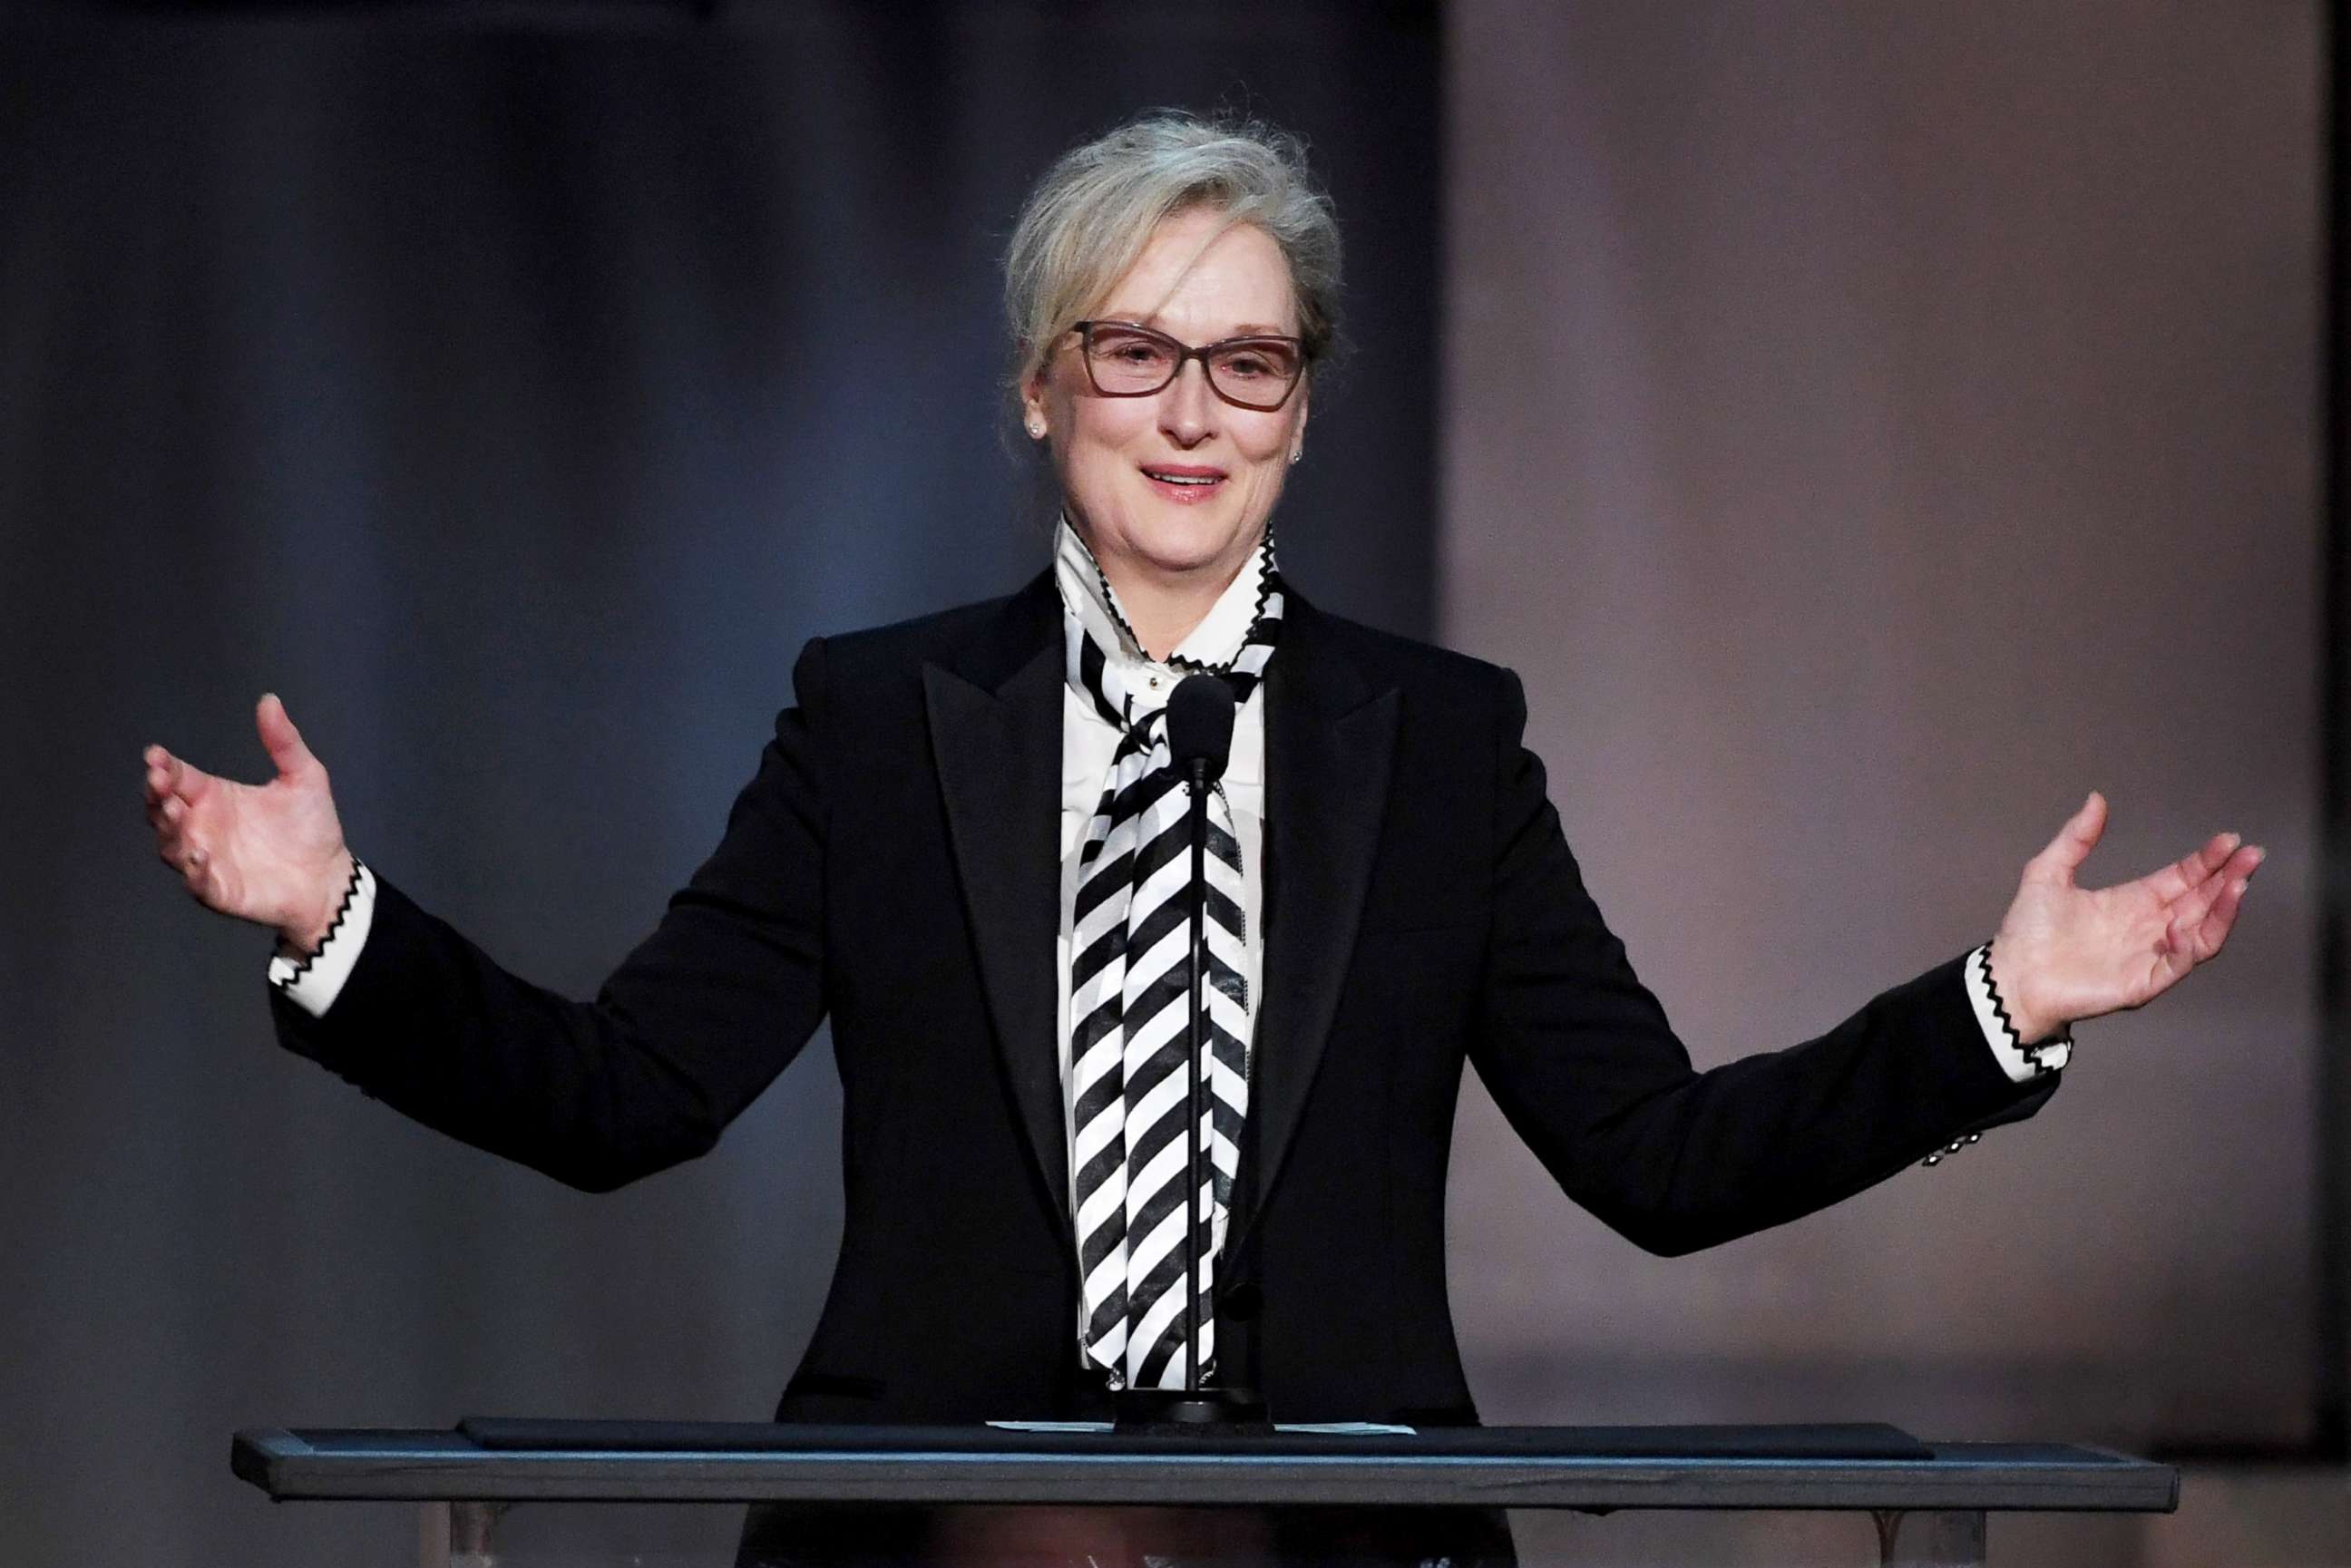 PHOTO: Meryl Streep speaks onstage during American Film Institute's 45th Life Achievement Award gala tribute to Diane Keaton at Dolby Theatre, June 8, 2017, in Hollywood, Calif.